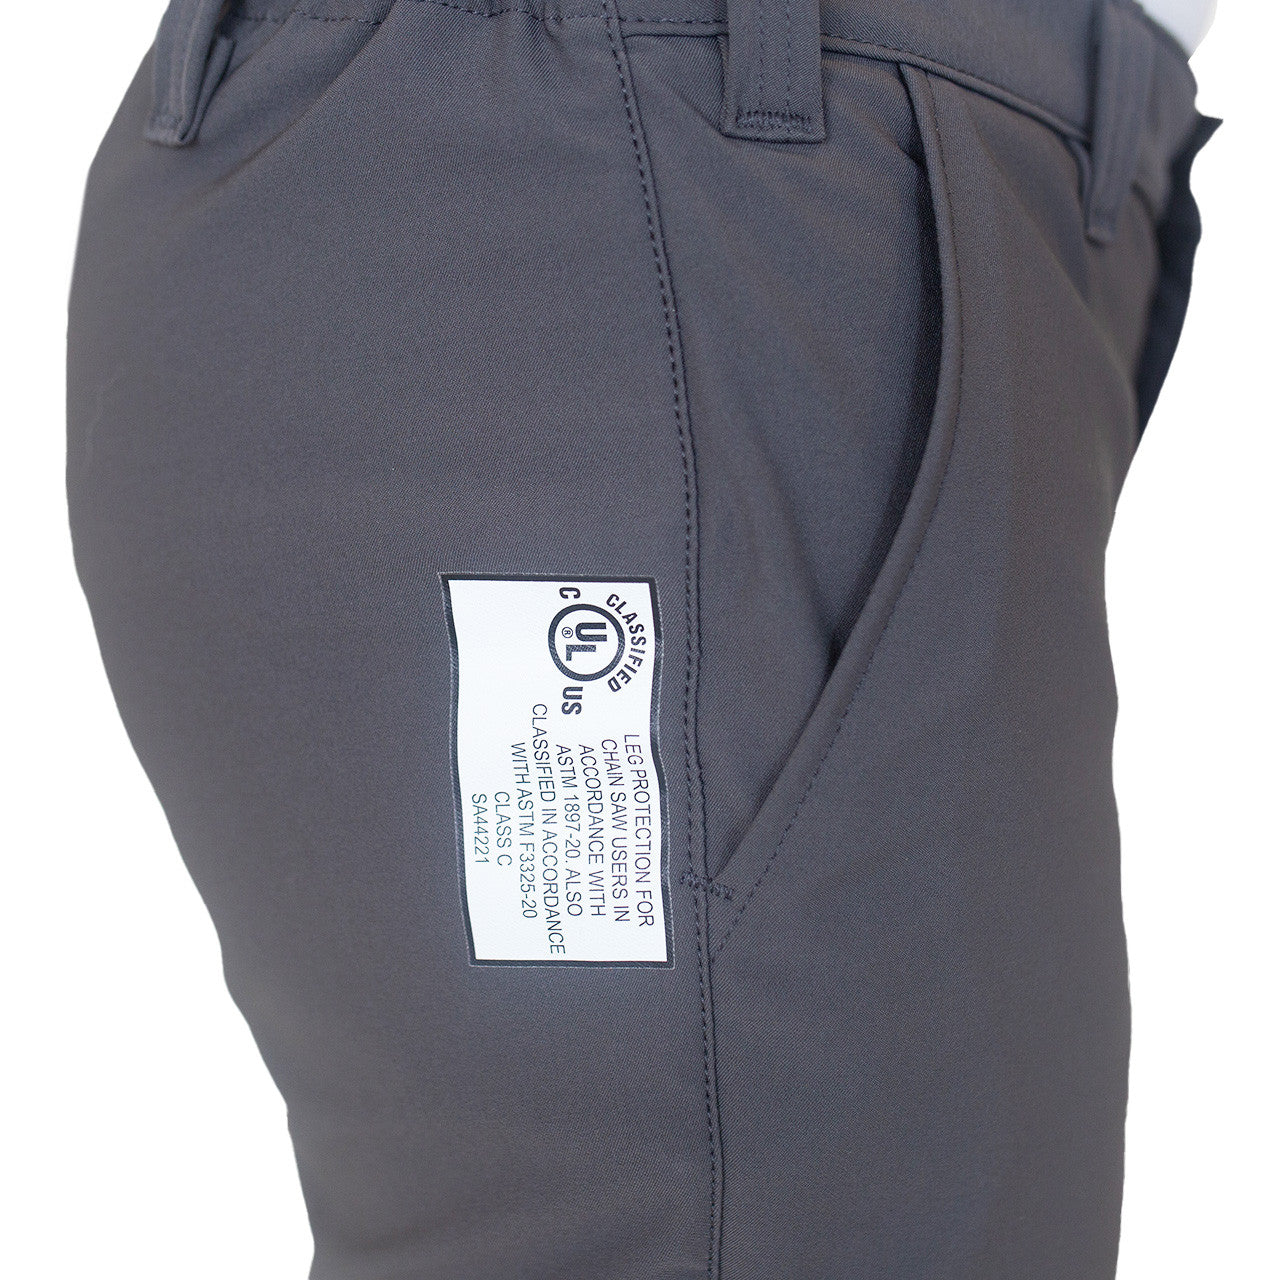 Clogger NEW Clogger TreeCREW Men’s Chainsaw Trousers